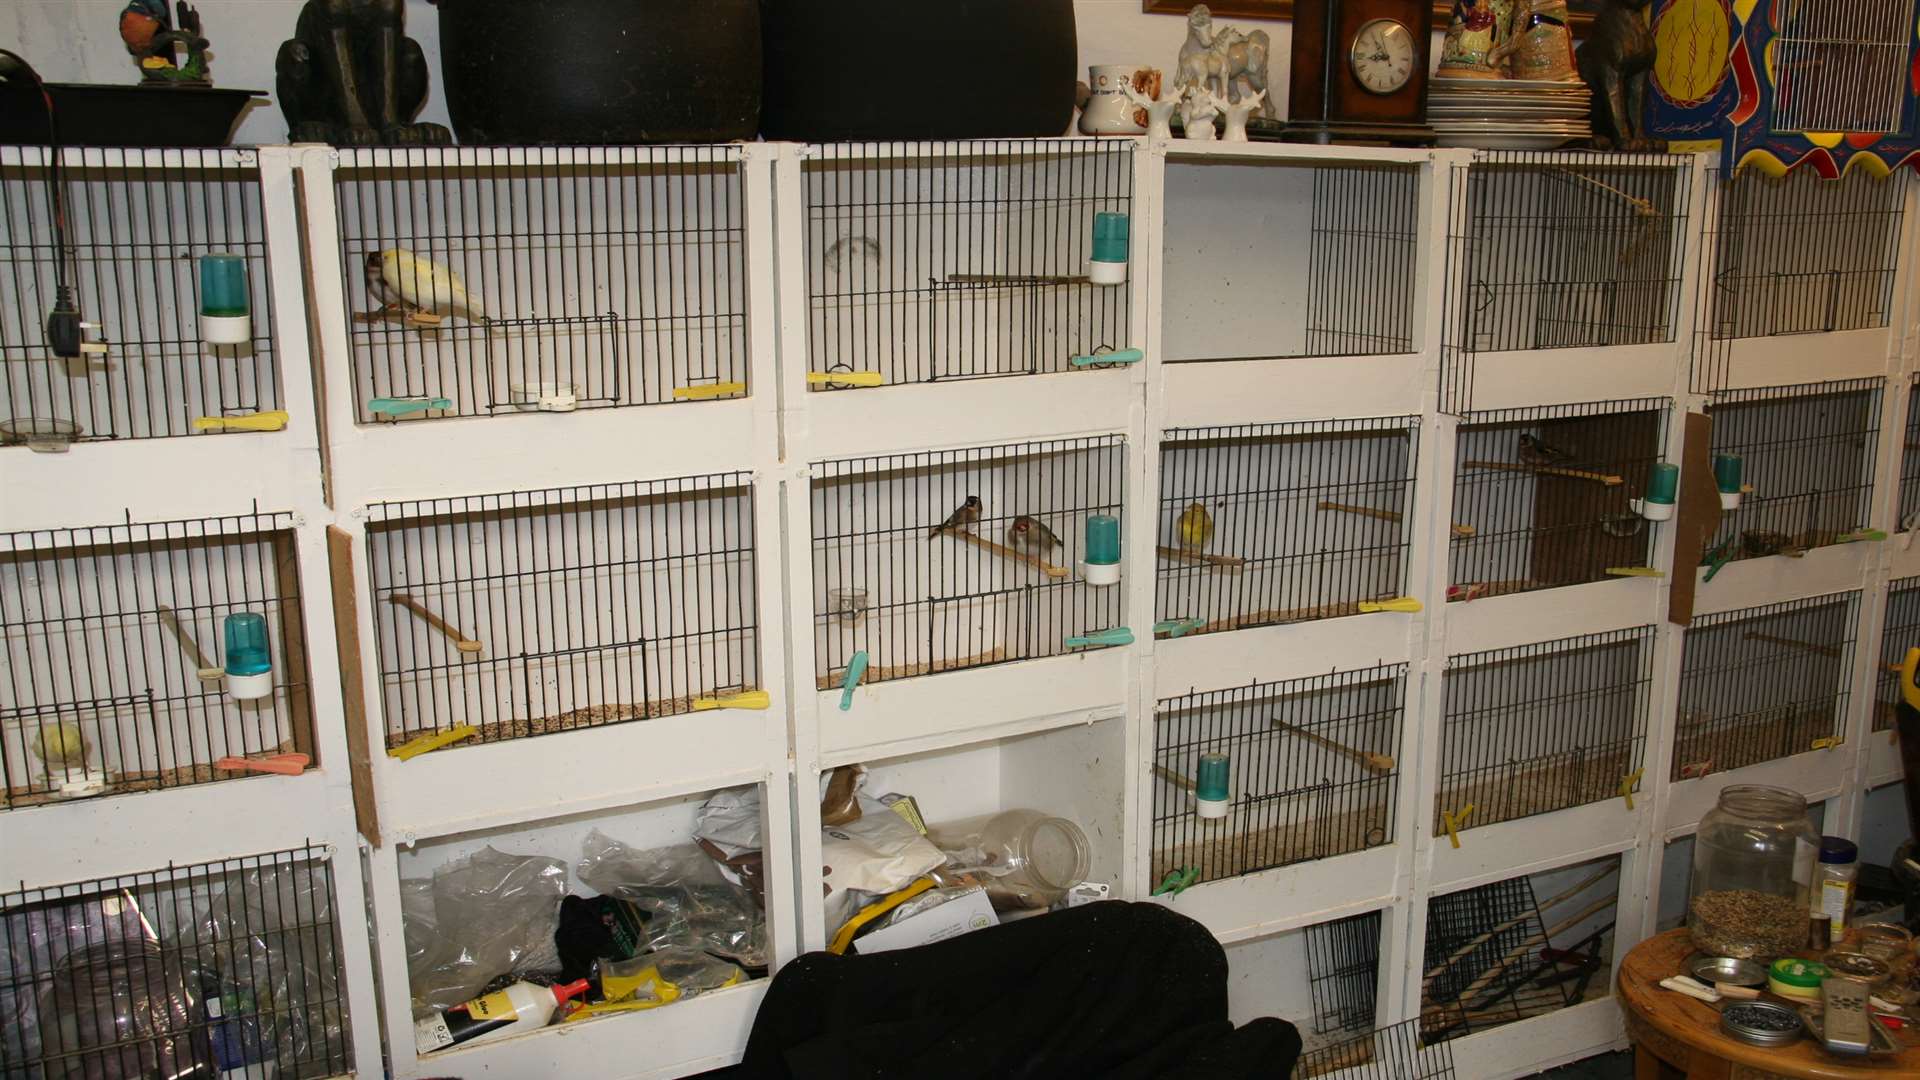 Birds were also found at the property. Picture: RSPCA.